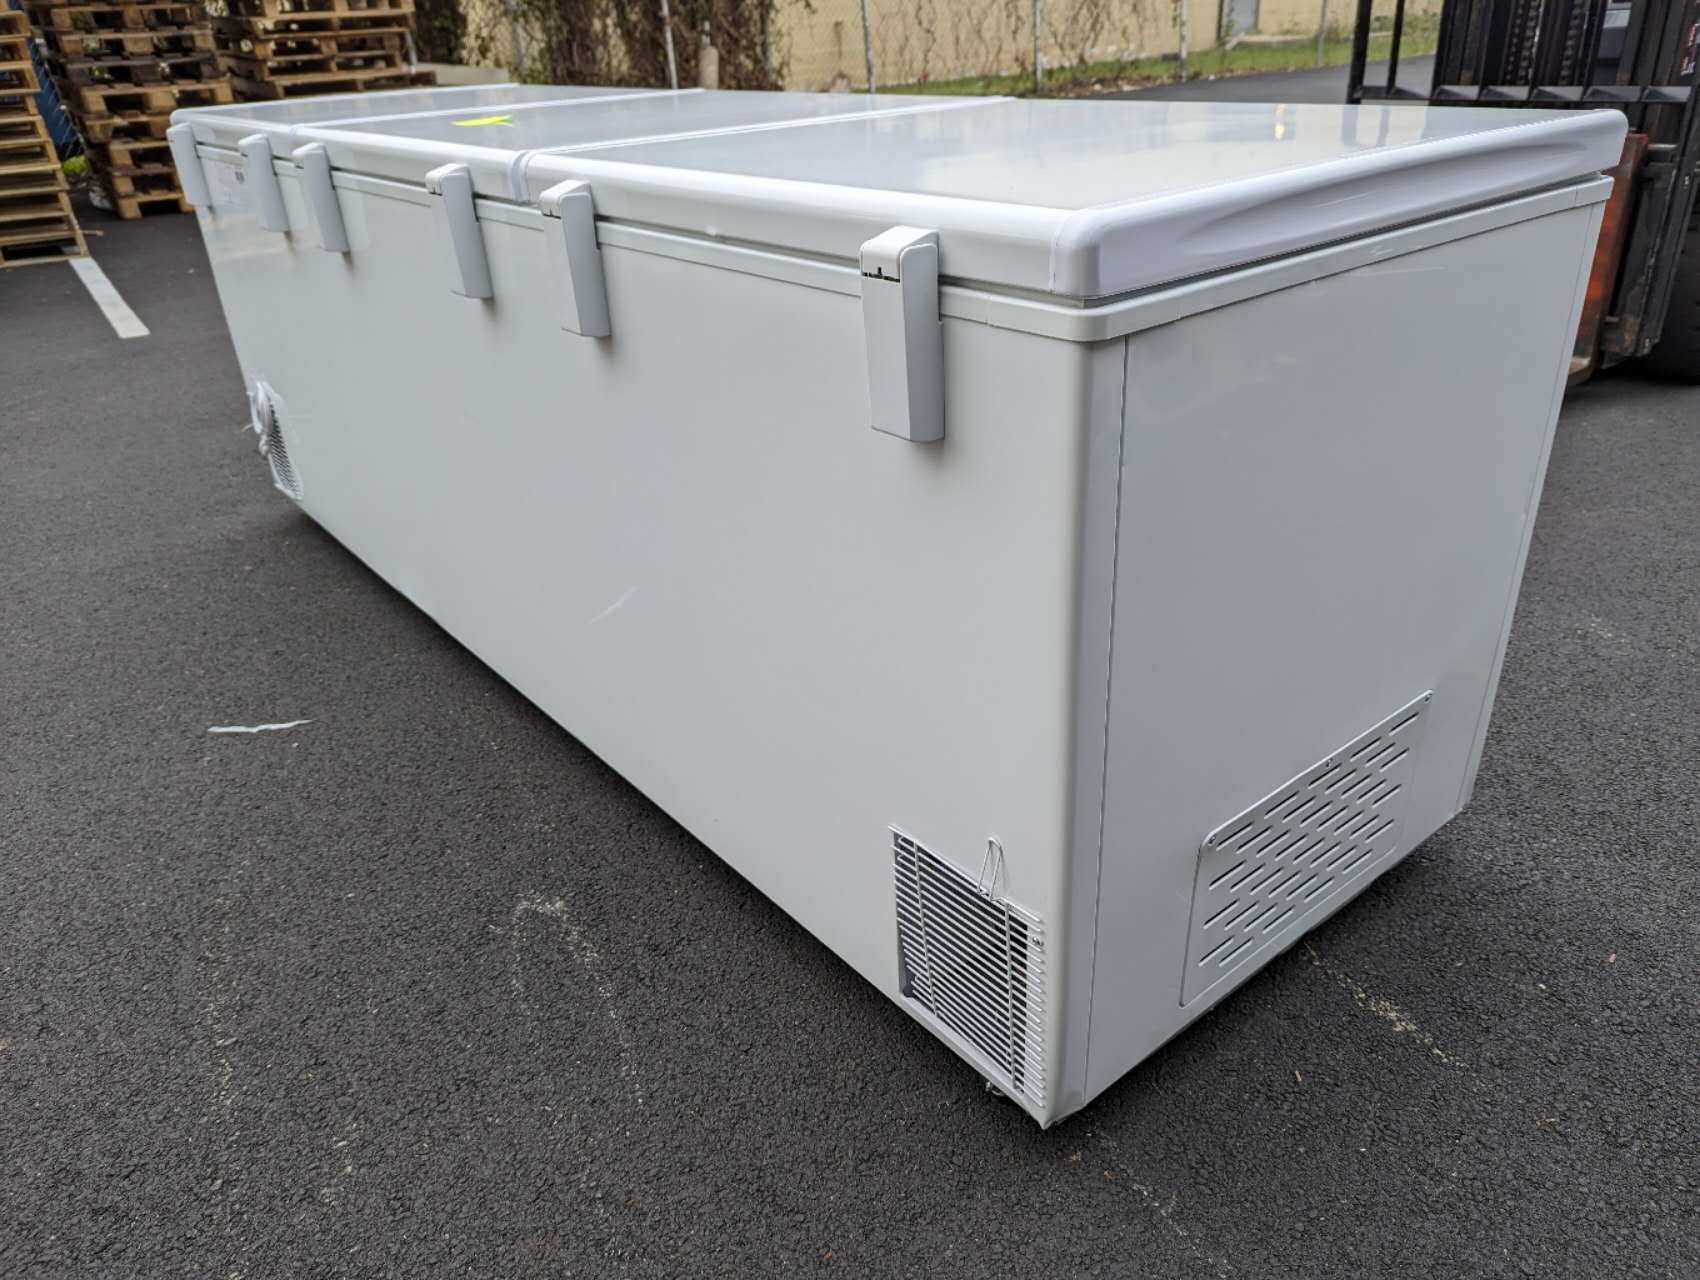 Sold at Auction: SMALL CHEST FREEZER CLEAN